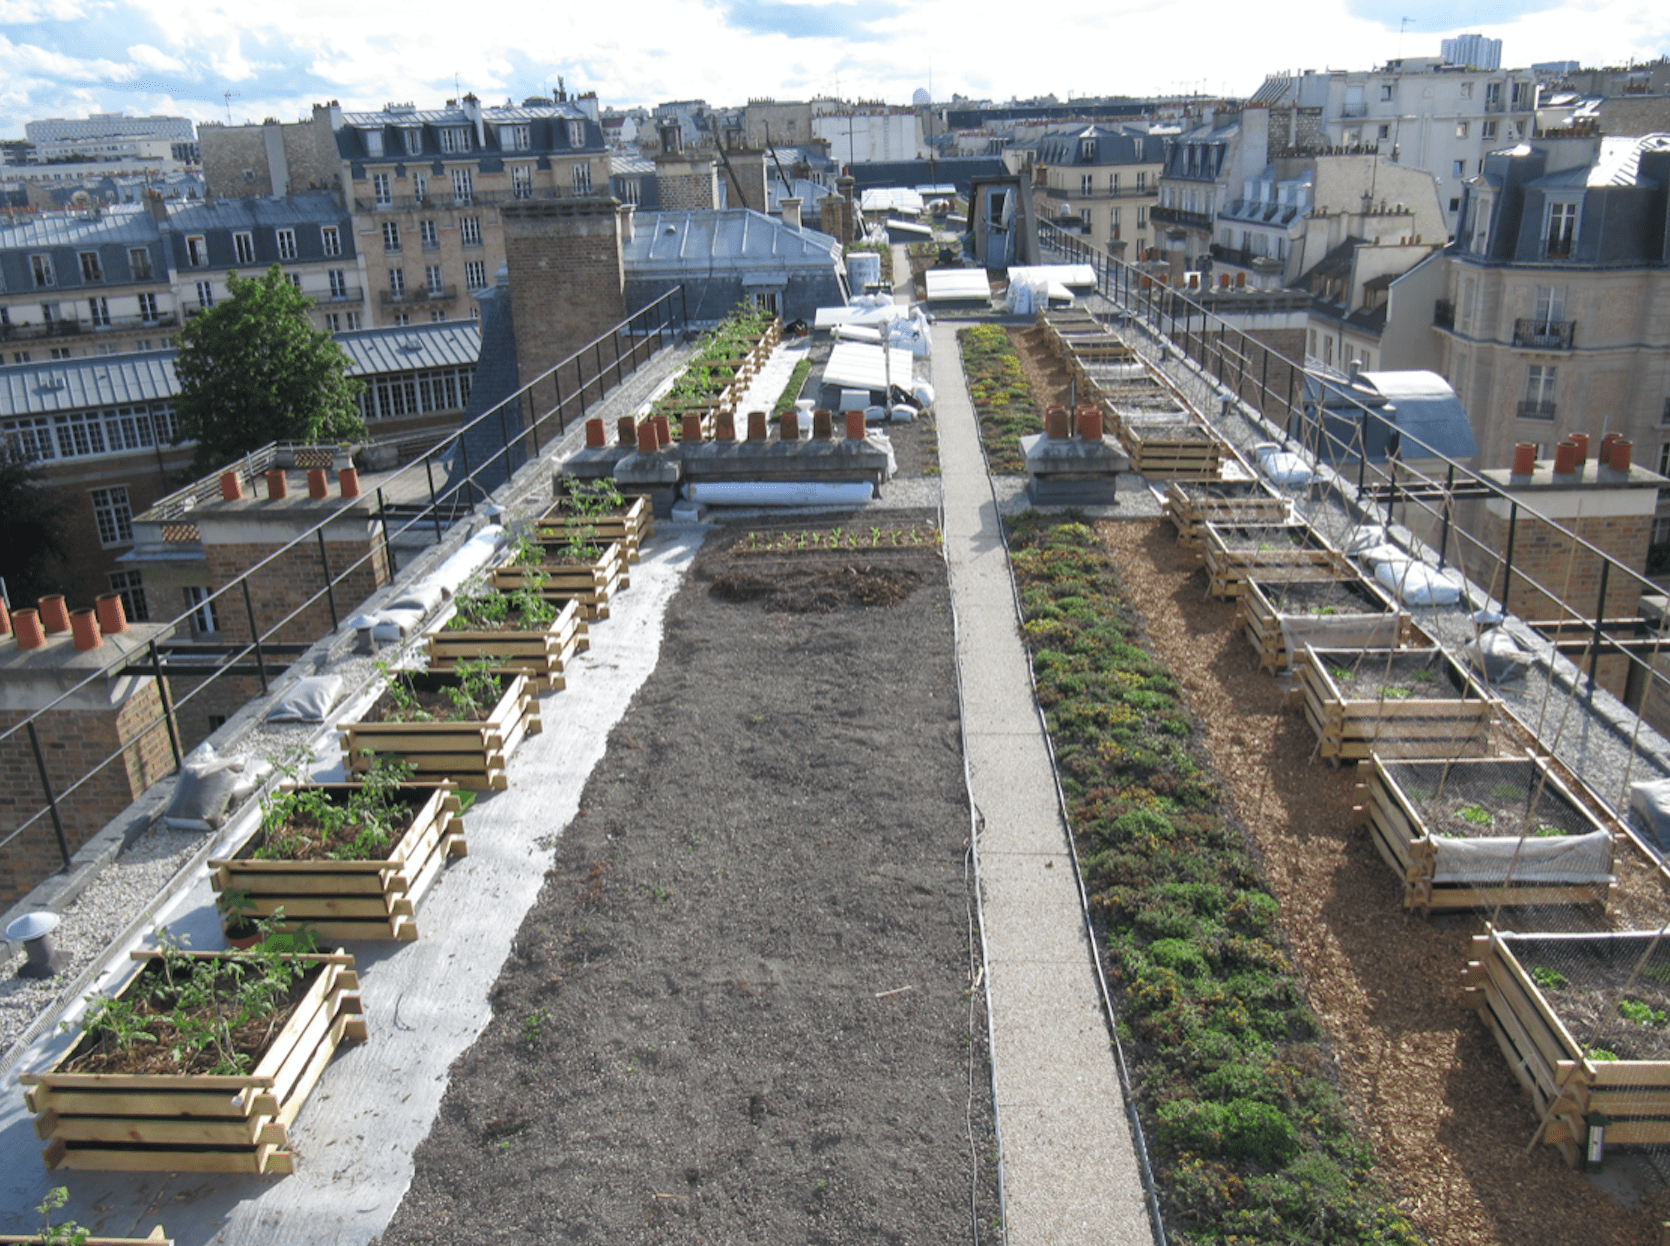 Vegetable and extensive roofs: biodiversity, soils and practices